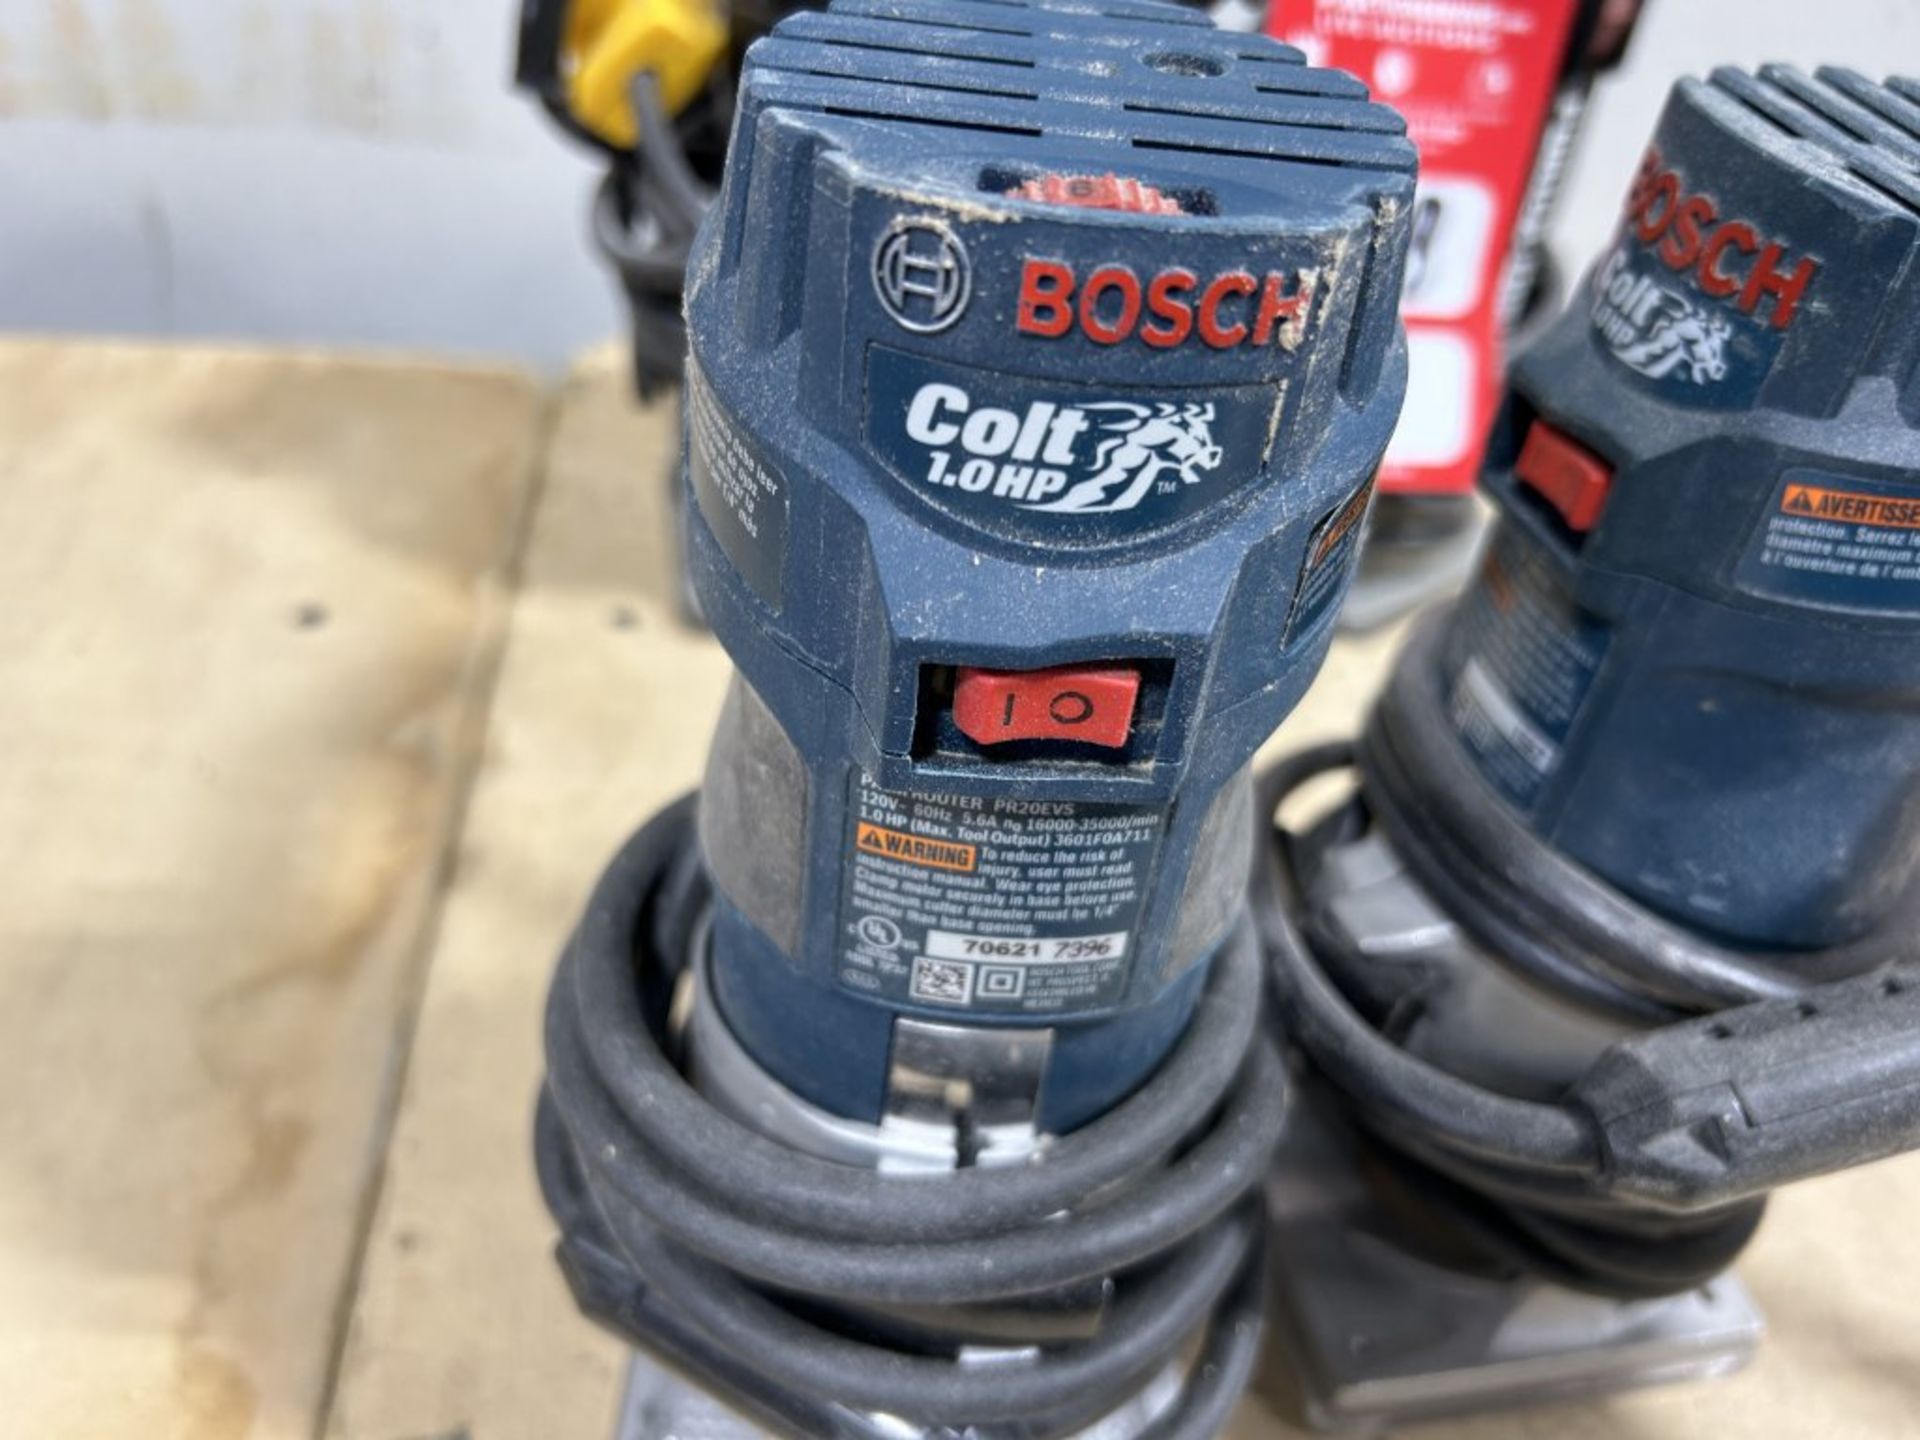 (2) BOSCH COLT 1.0HP ROUTERS - Image 2 of 4